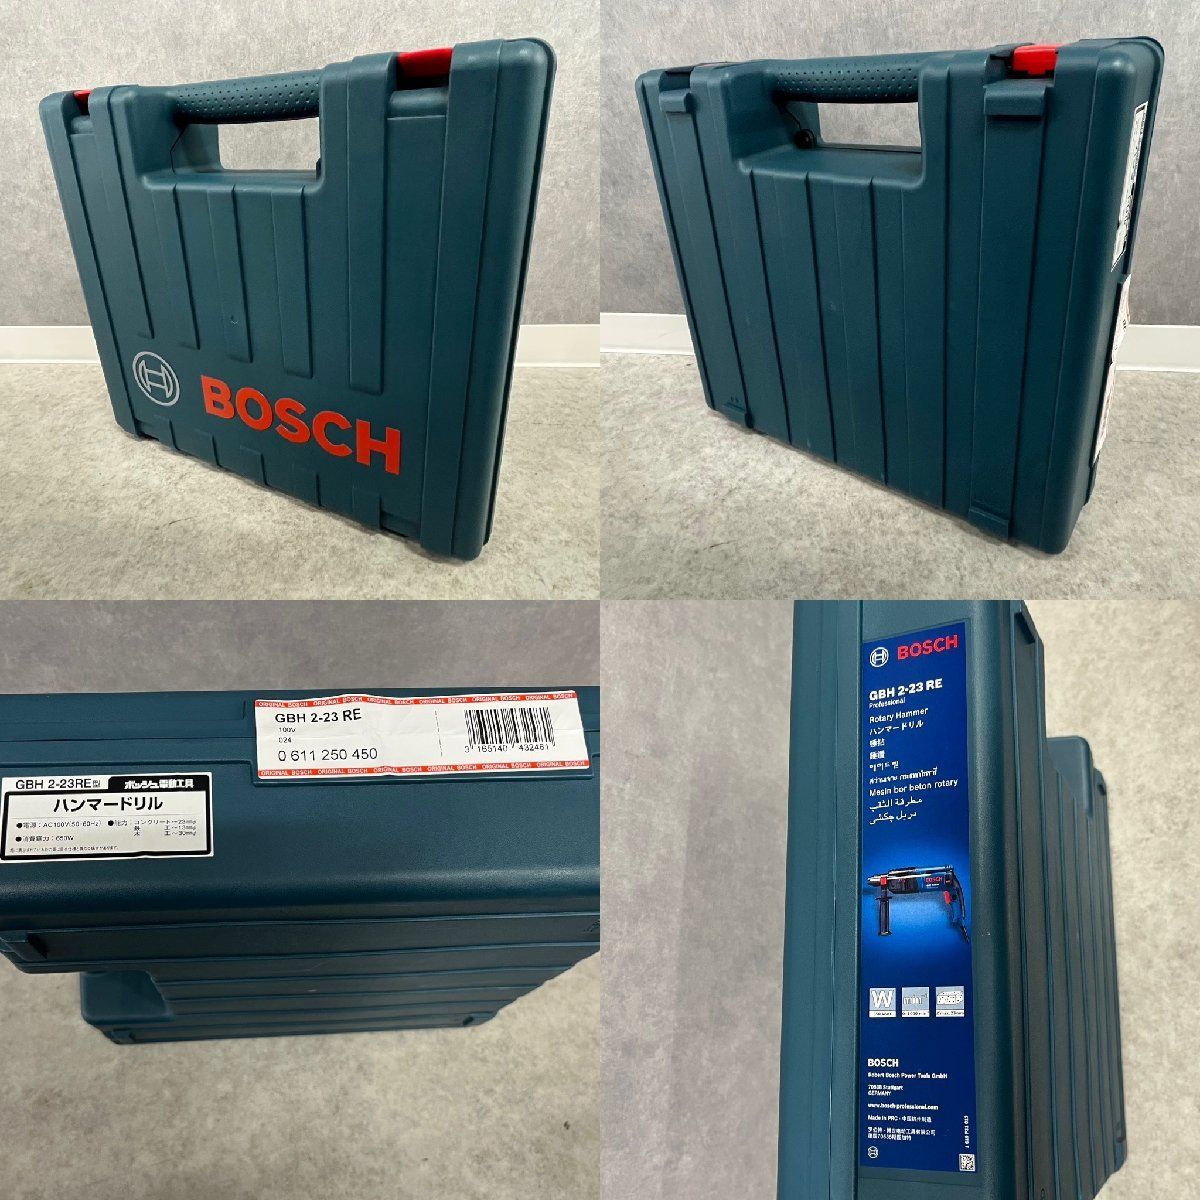 ◎J615 BOSCH 23mm ハンマードリル GBH 2-23RE ボッシュ電動工具 (rt